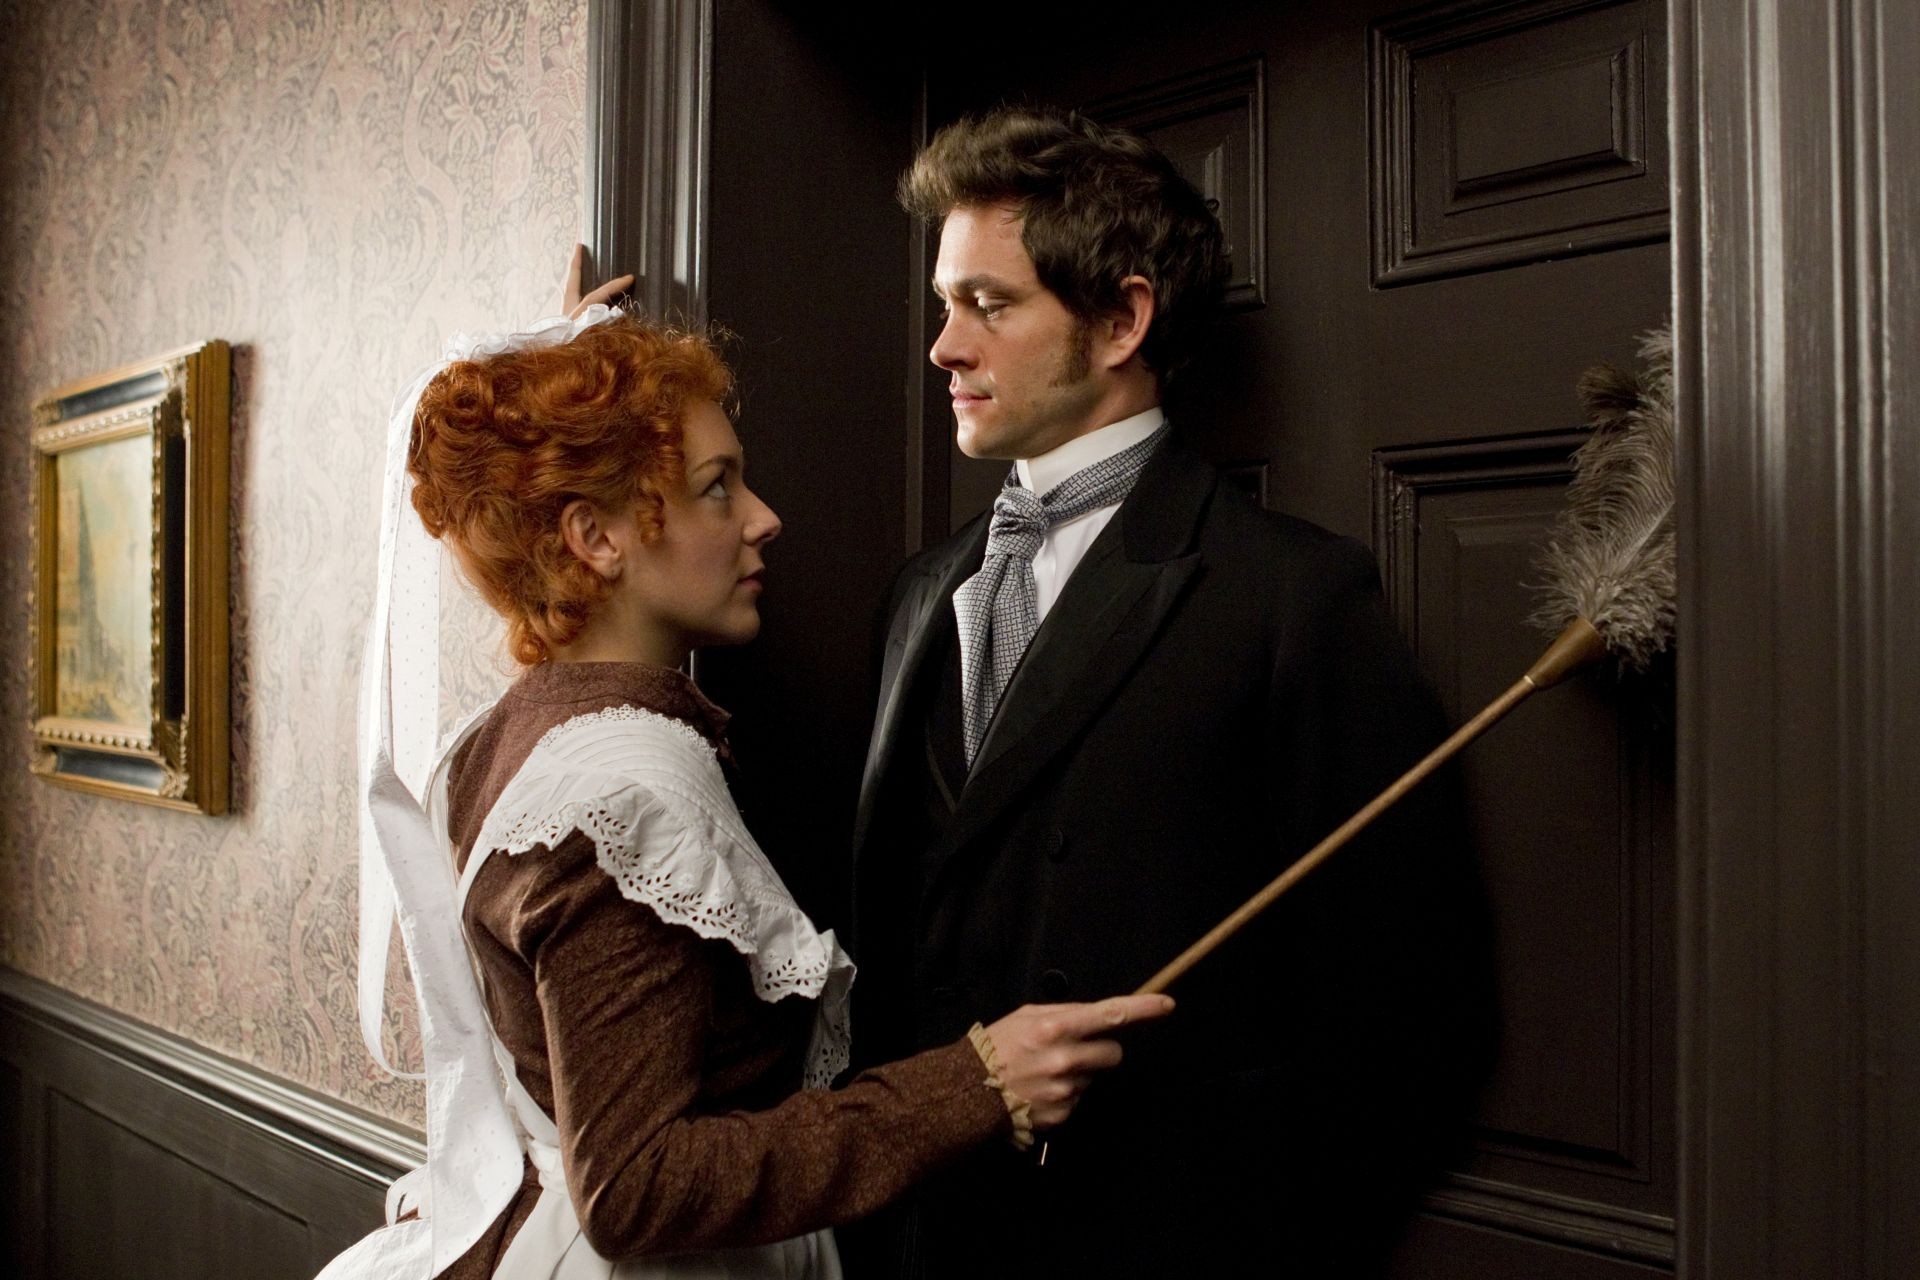 Sheridan Smith stars as Molly the Lolly and Hugh Dancy stars as Dr. Mortimer Granville in Sony Pictures Classics' Hysteria (2012). Photo credit by Ricardo Vaz Palma.